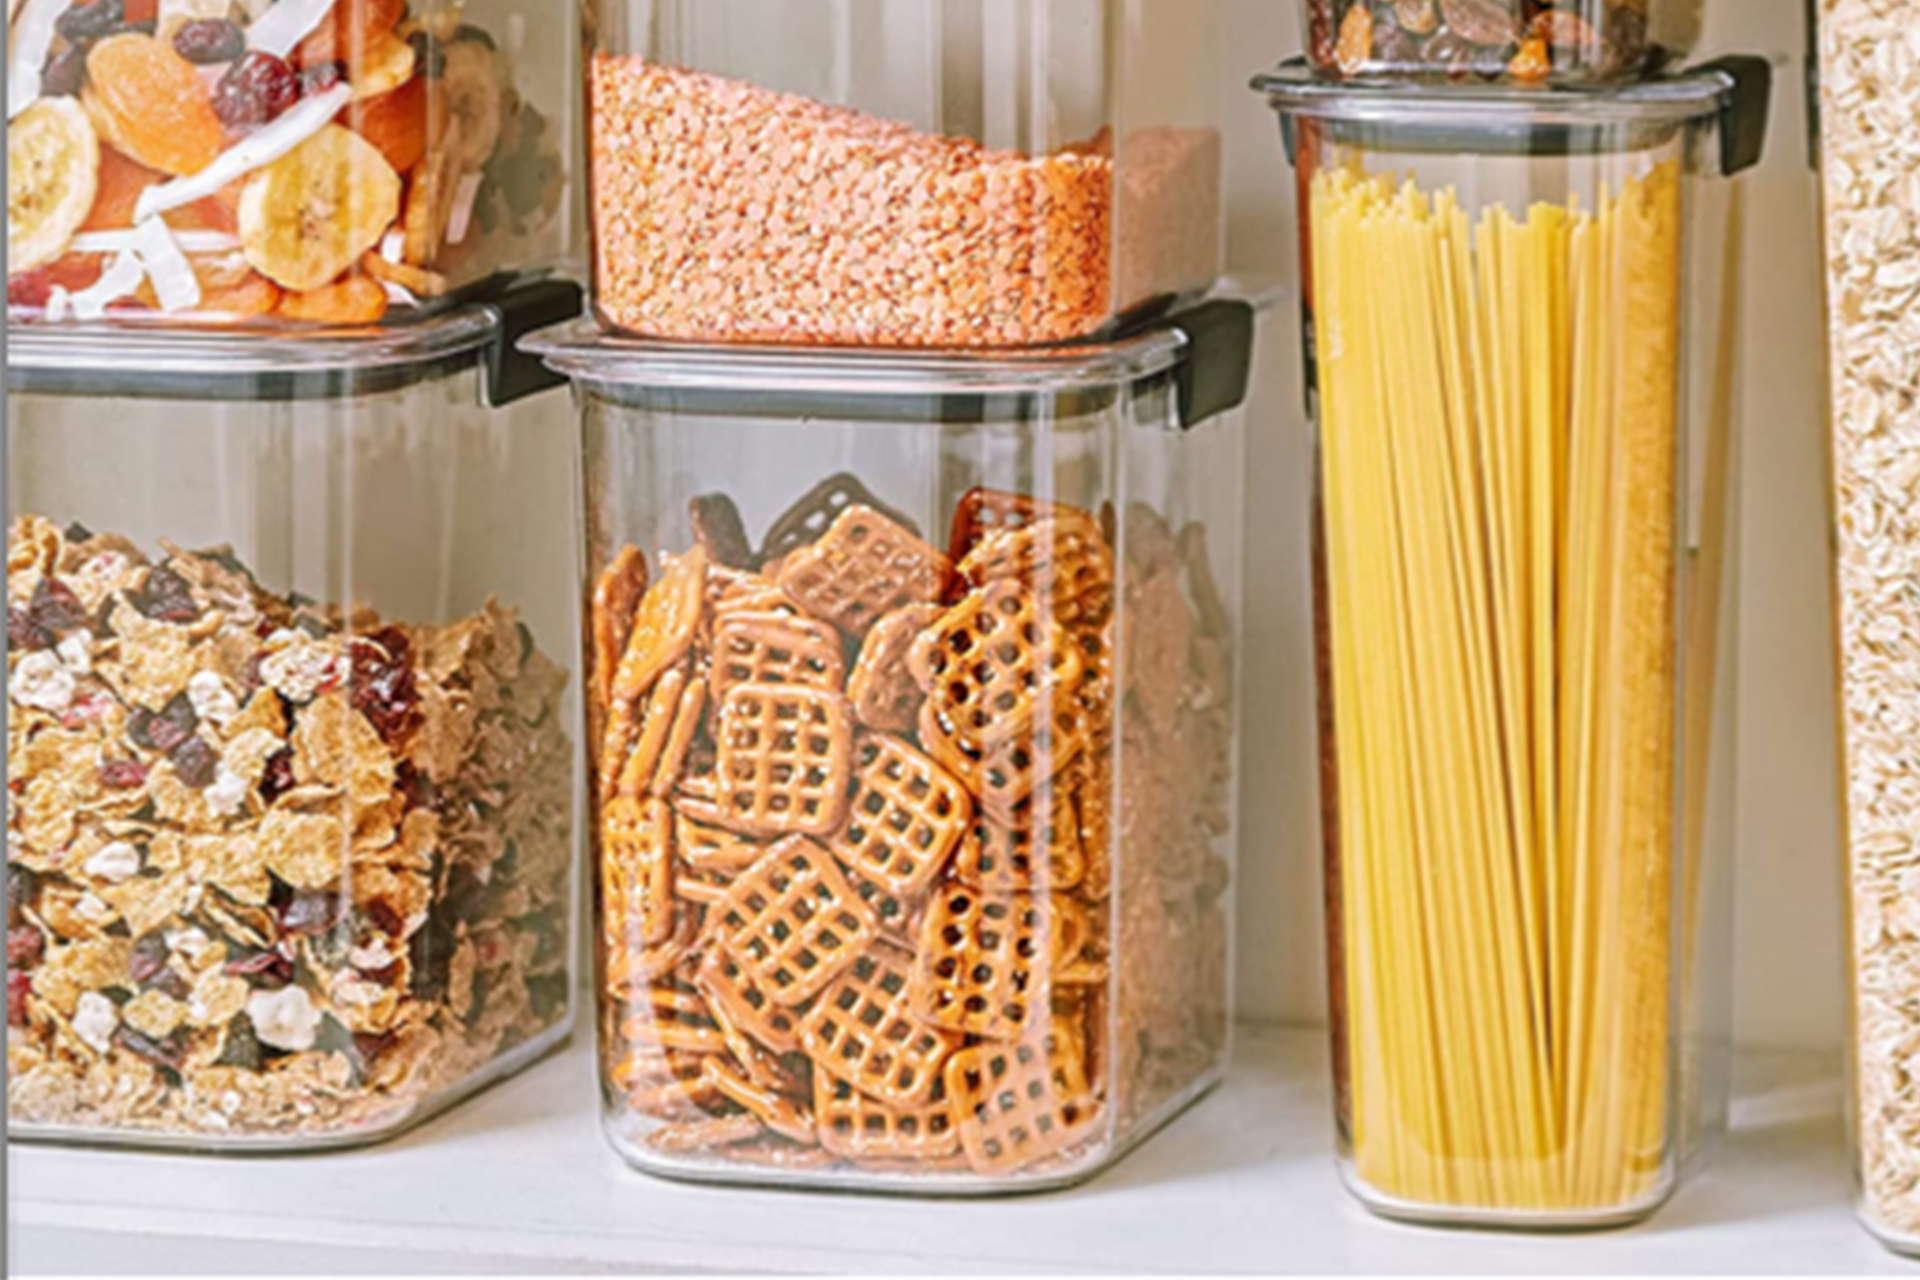 Newell's Rubbermaid launches Brilliance glass food storage containers